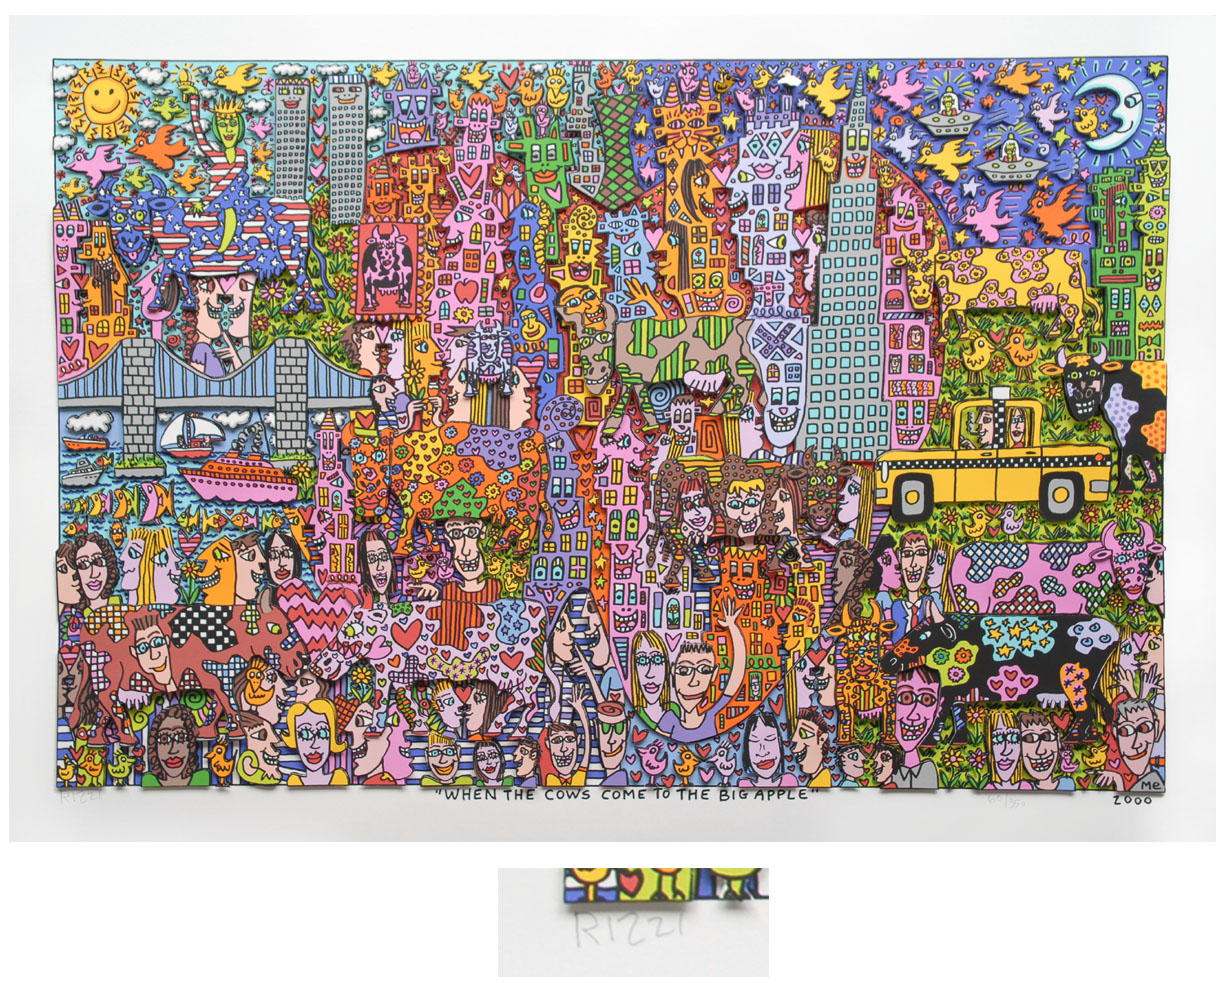 james rizzi: when the cows come to the big apple - galerie-f